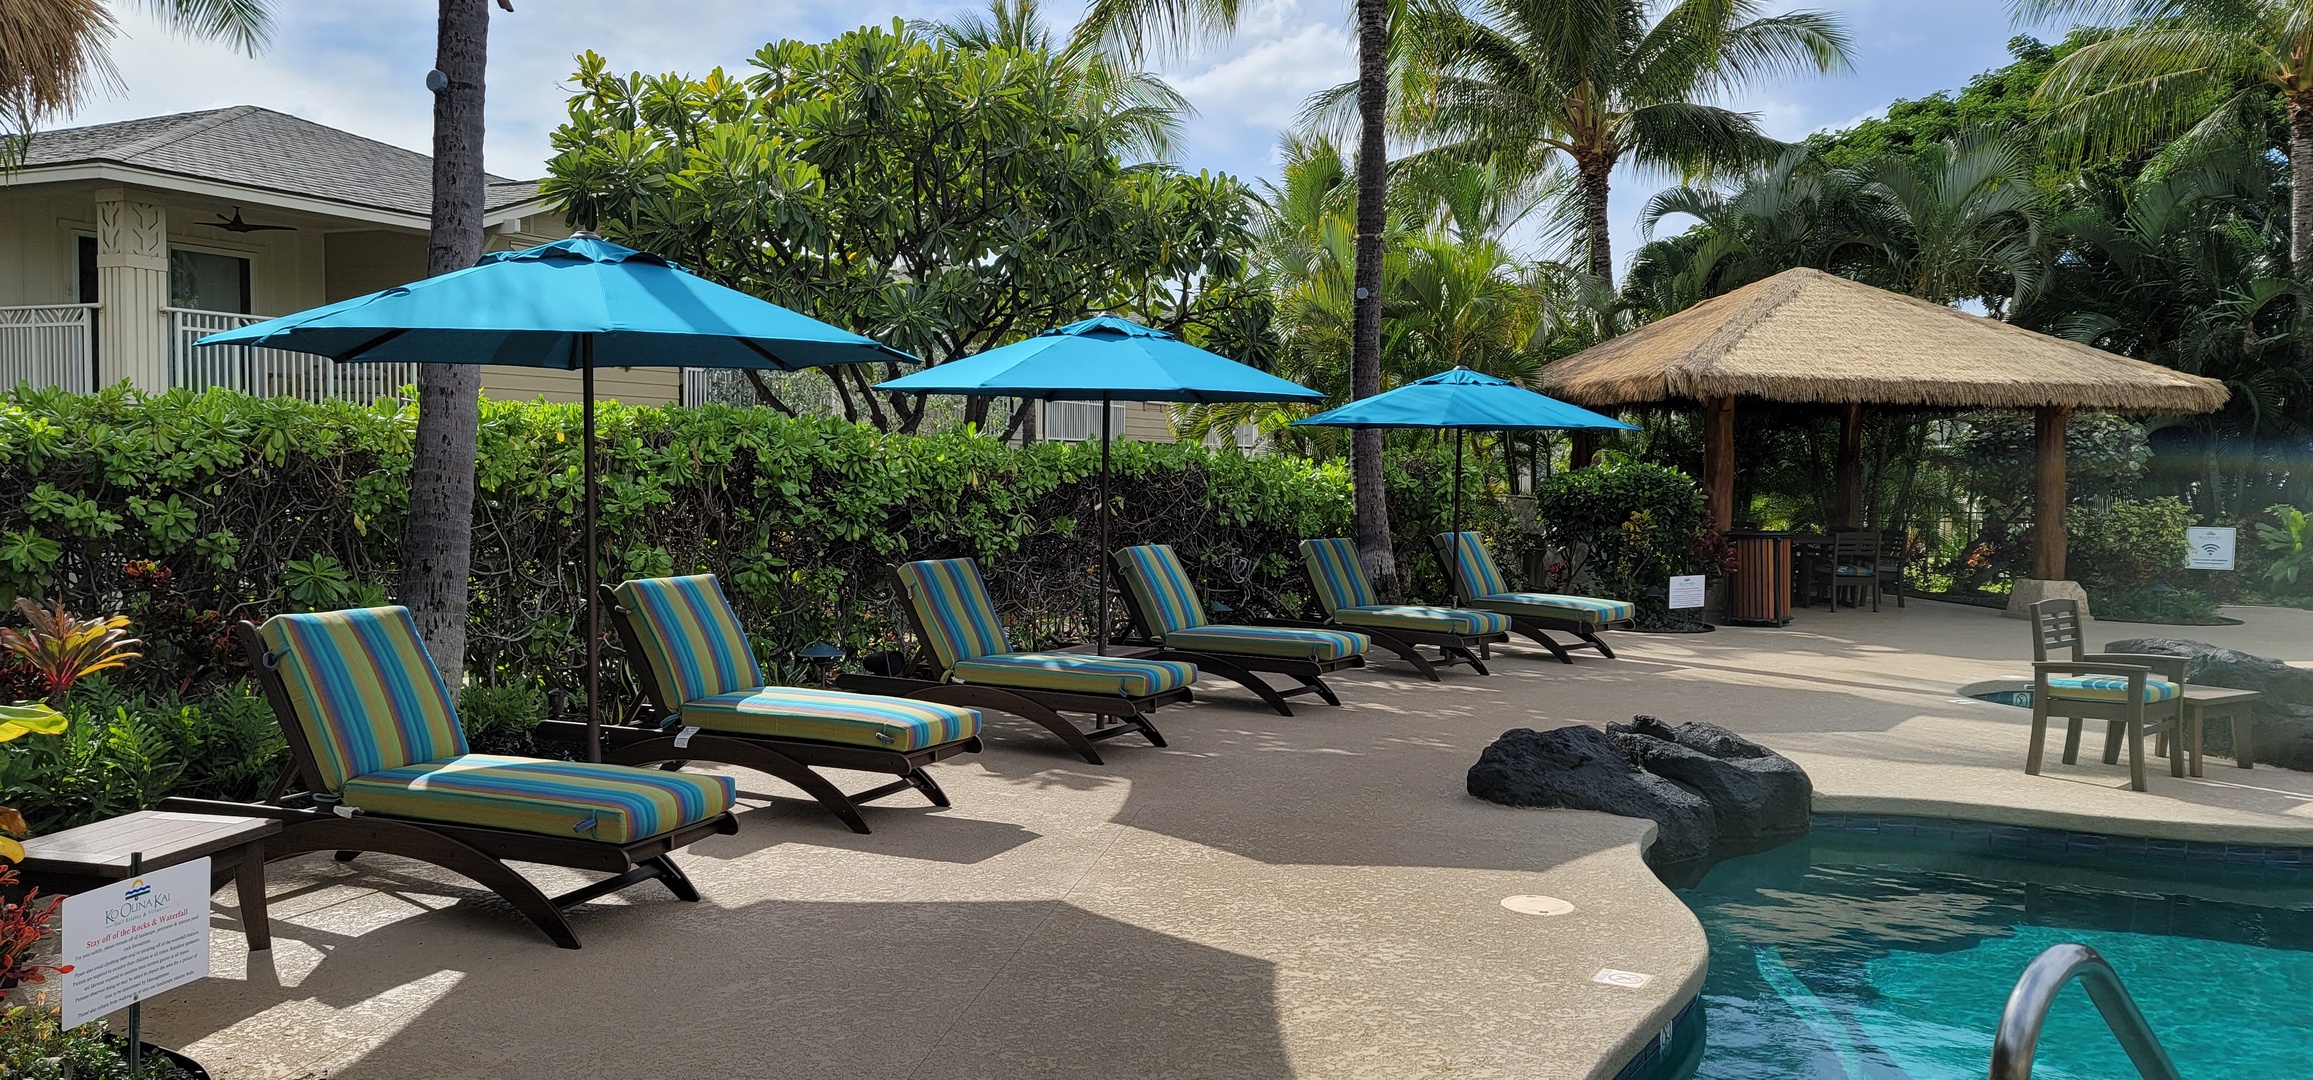 Kapolei Vacation Rentals, Ko Olina Kai 1097C - Loungers and cabanas by the pool, a perfect spot to share drinks while lounging.